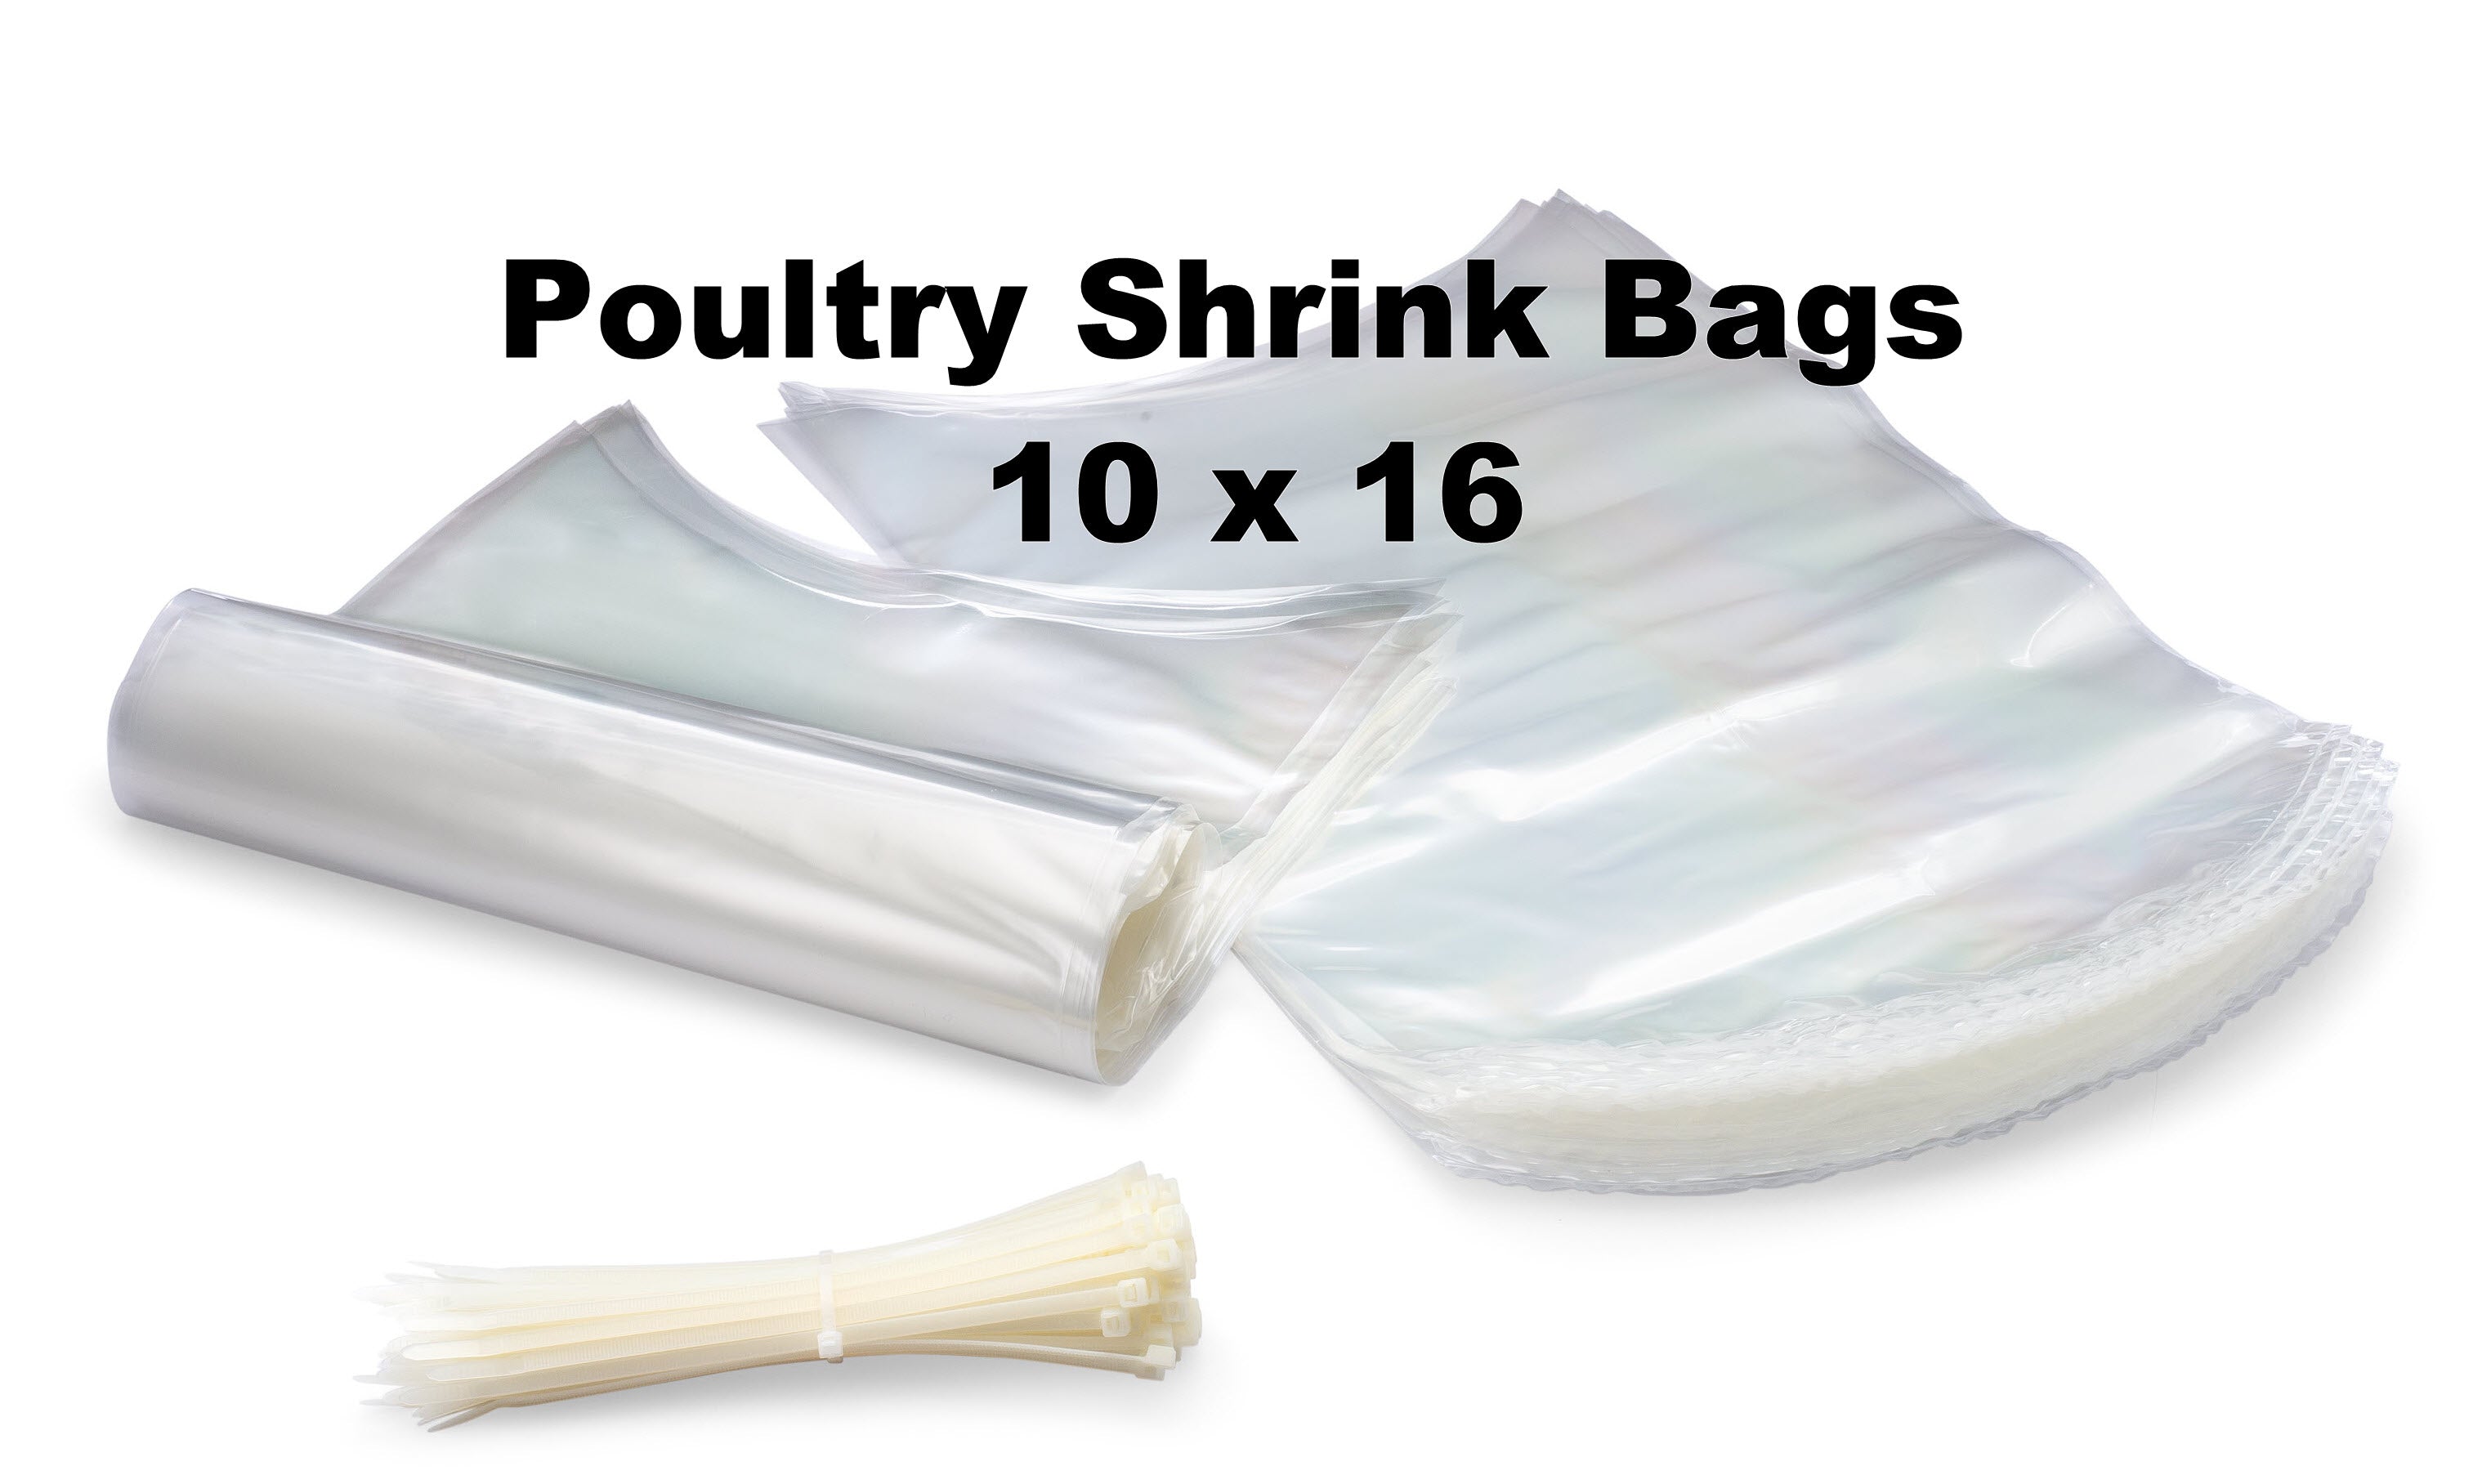 24 Pack of 10x16 Poultry Shrink Bags Chicken Food Processing Saver Heat Freezer